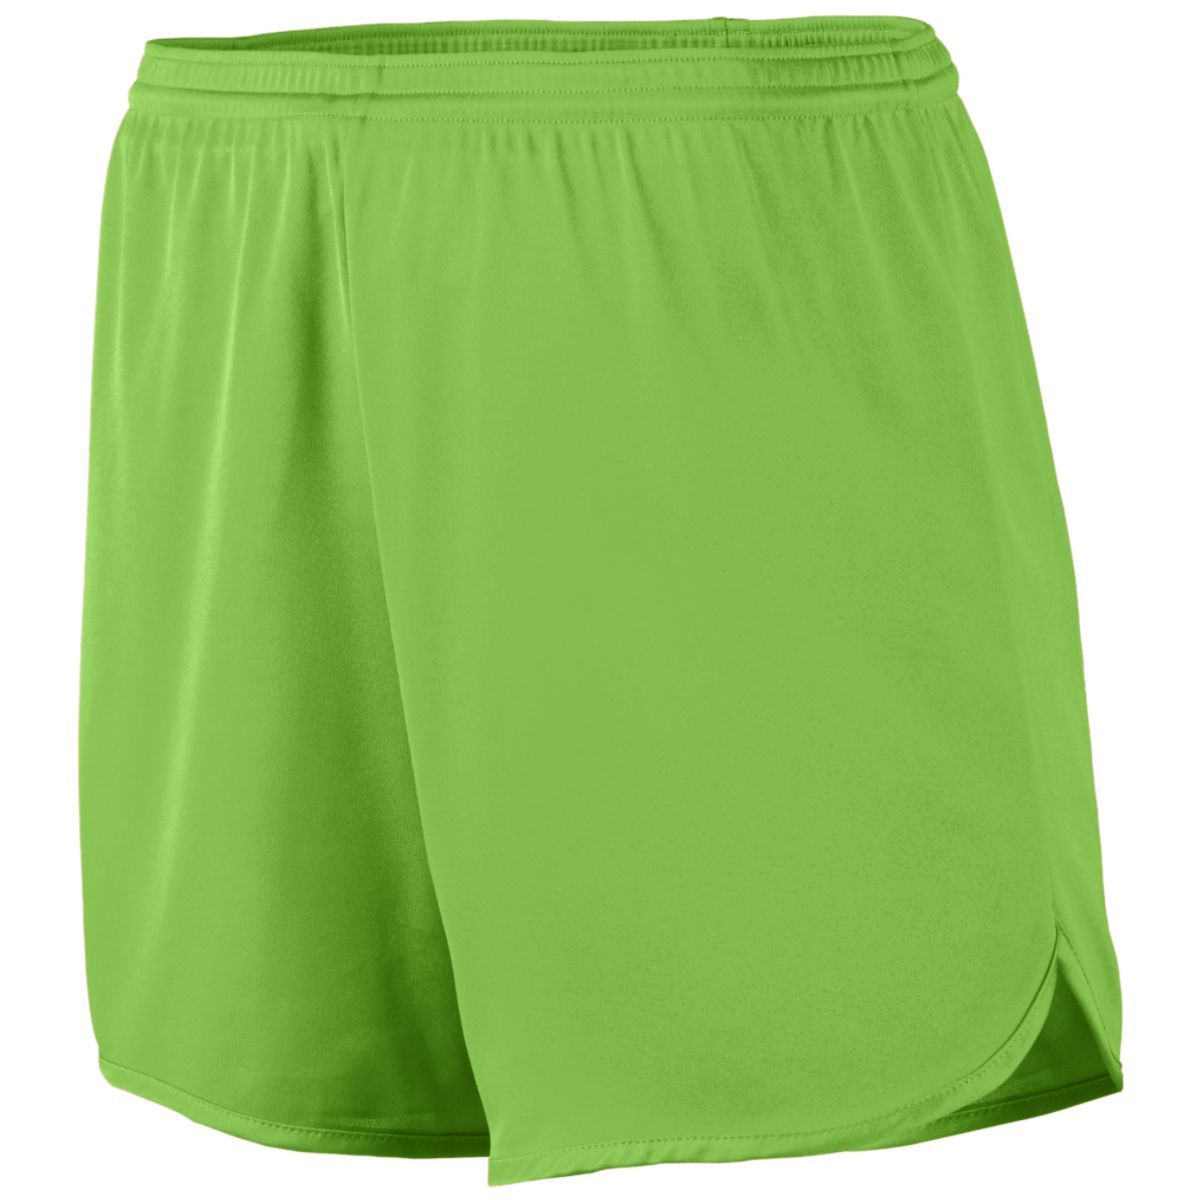 Augusta Sportswear Accelerate Shorts in Lime  -Part of the Adult, Adult-Shorts, Augusta-Products, Track-Field product lines at KanaleyCreations.com